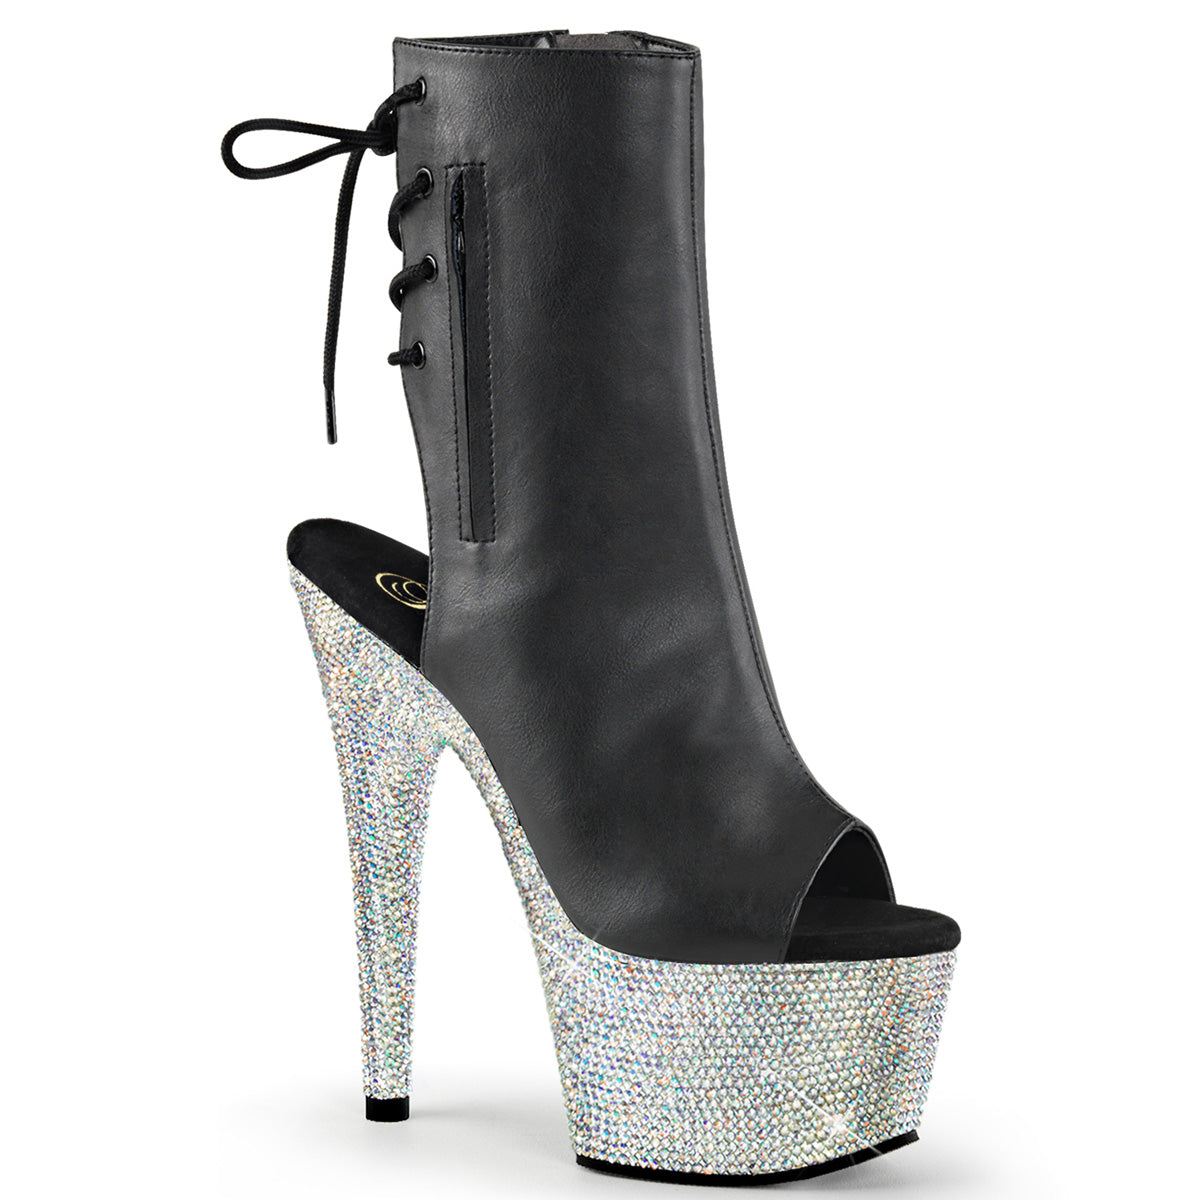 BEJEWELED-1018DM-7 Pleasers 7" Heel Black Bling Ankle Boots with Bling